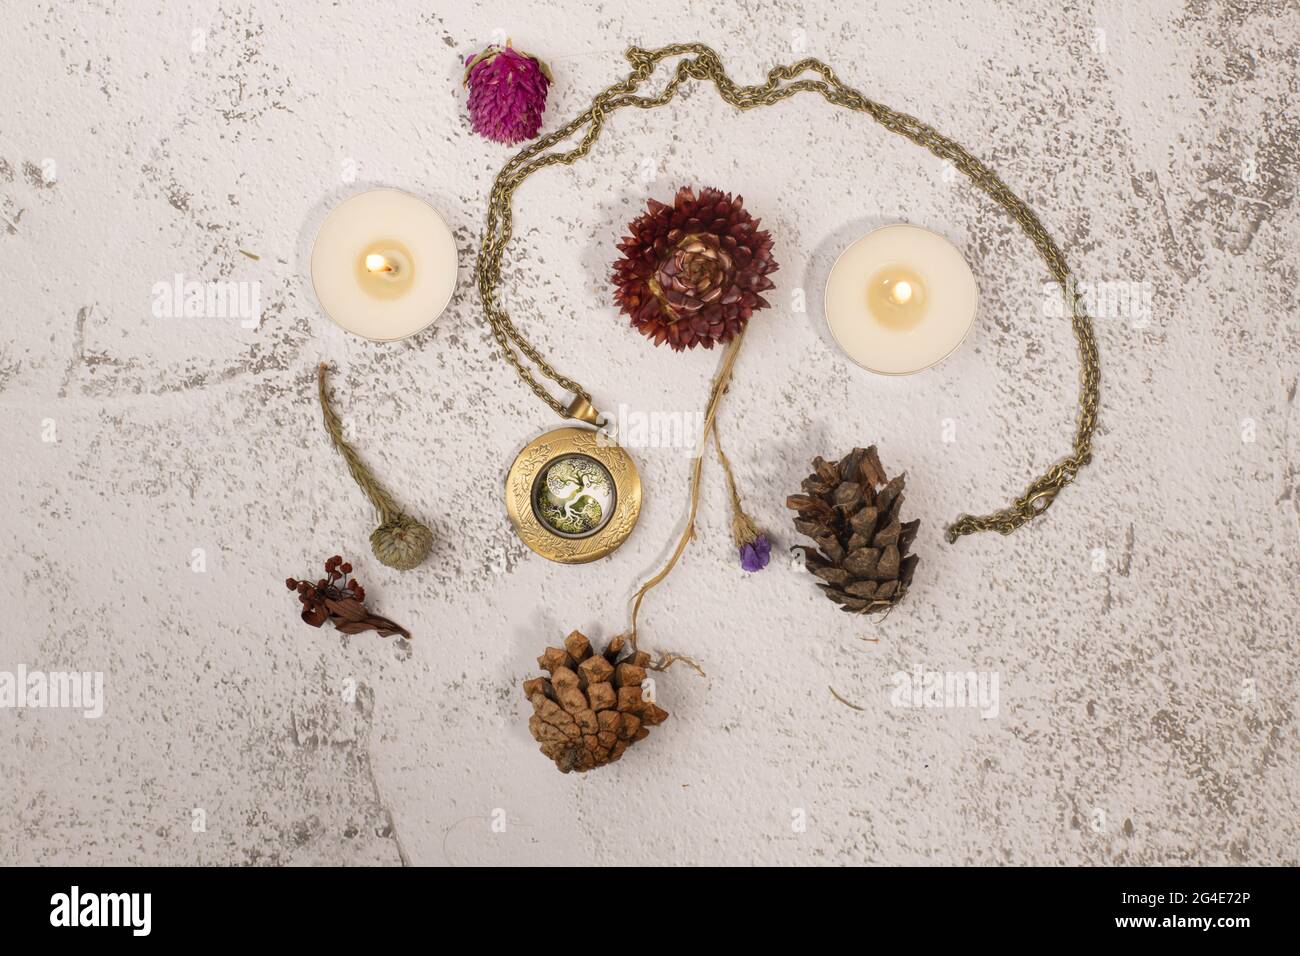 Flatlay with medallion, candles and dried flowers Stock Photo